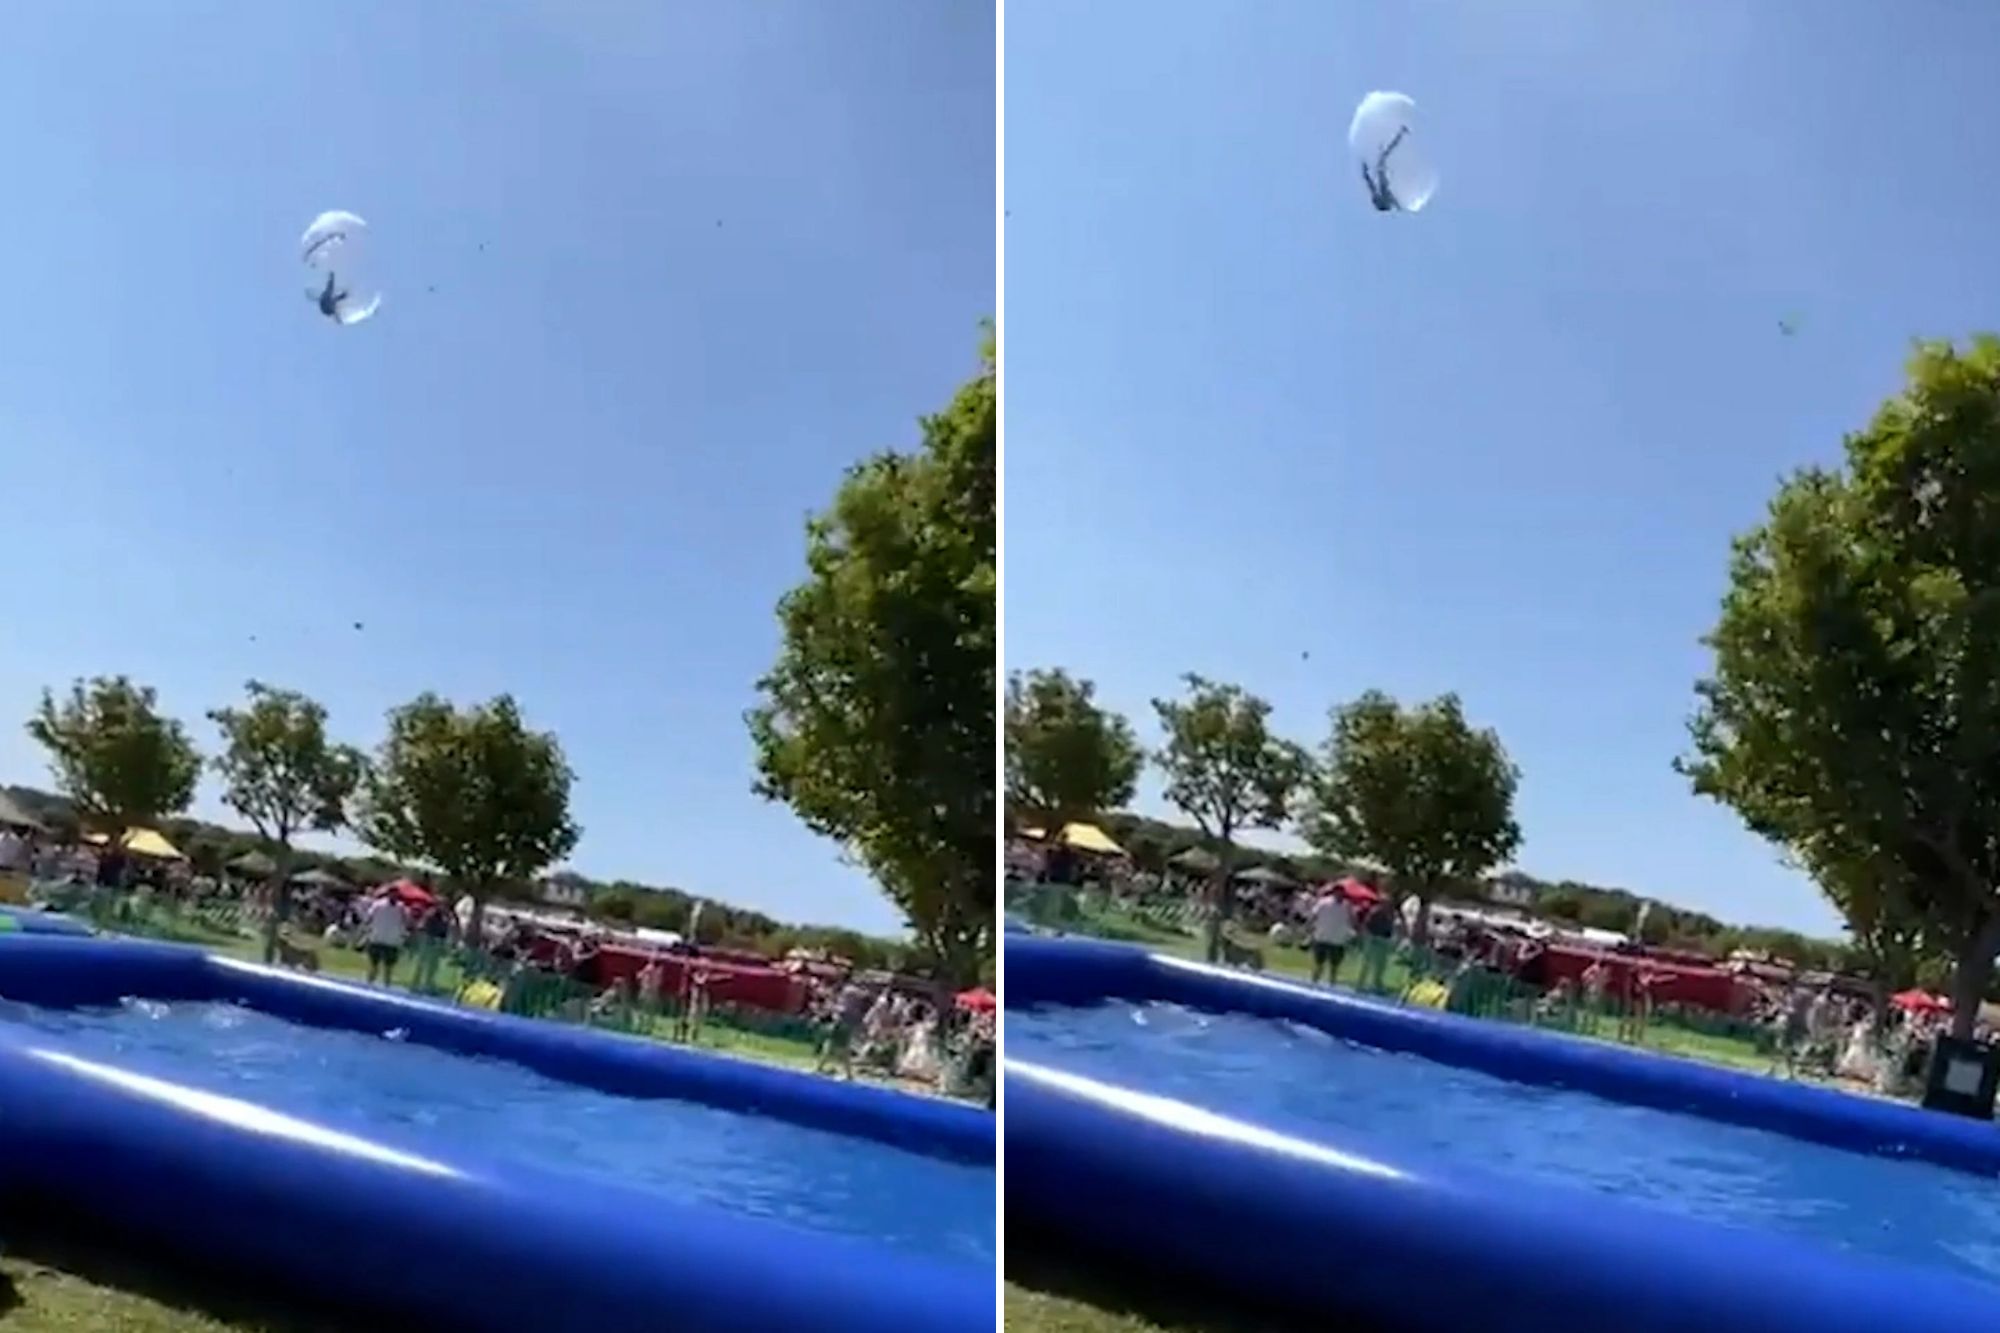 Terrifying moment boy in zorb is swept into air before crashing to the ground